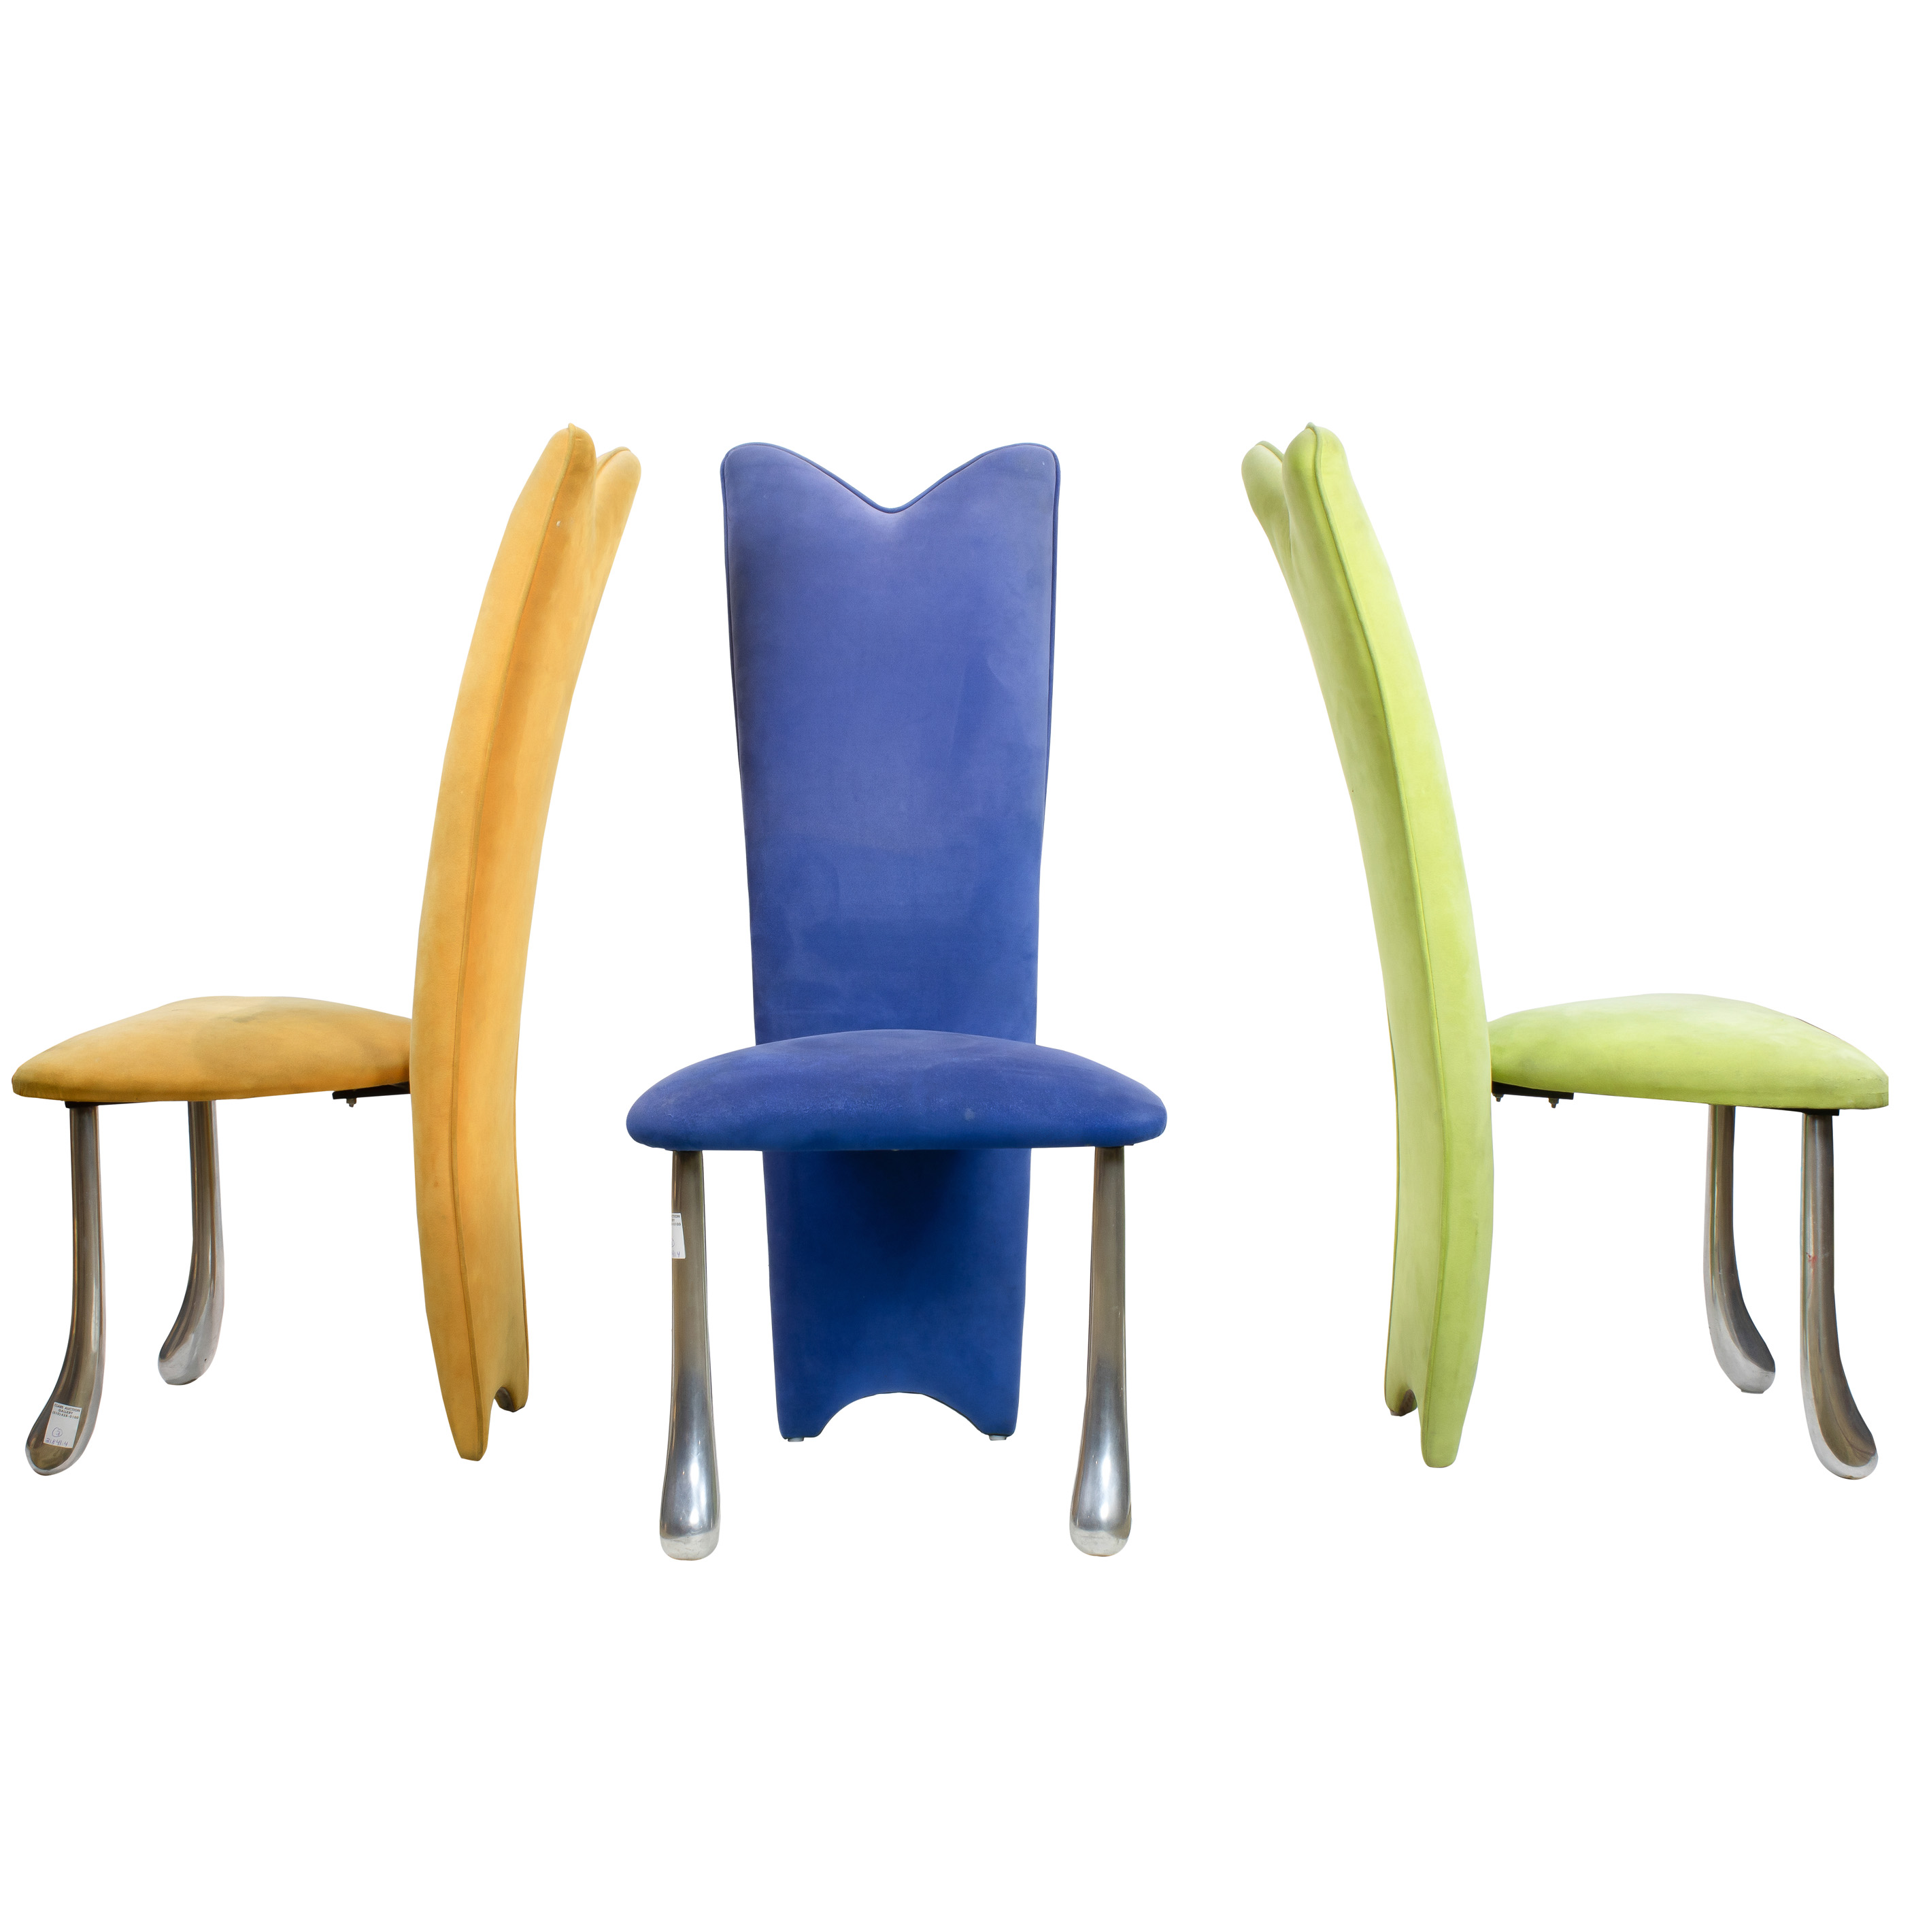 CONTEMPORARY SUEDE DINING CHAIRS 3a4135